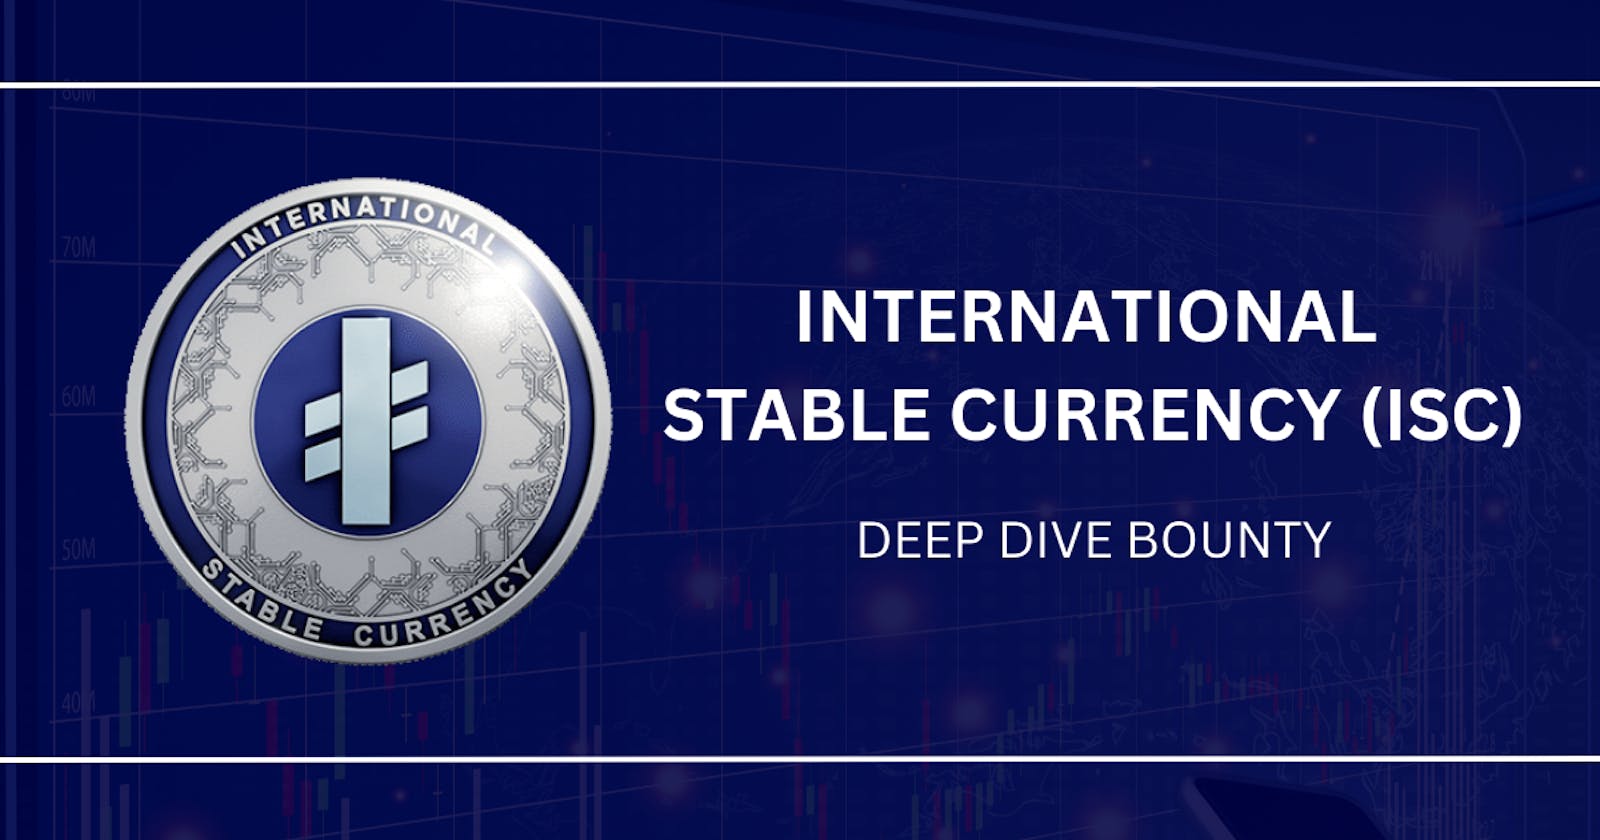 Redefining Stablecoin Paradigms on Stability, Risk-Reward Distribution, and Transparency: A Deep Dive into International Stable Currency (ISC)